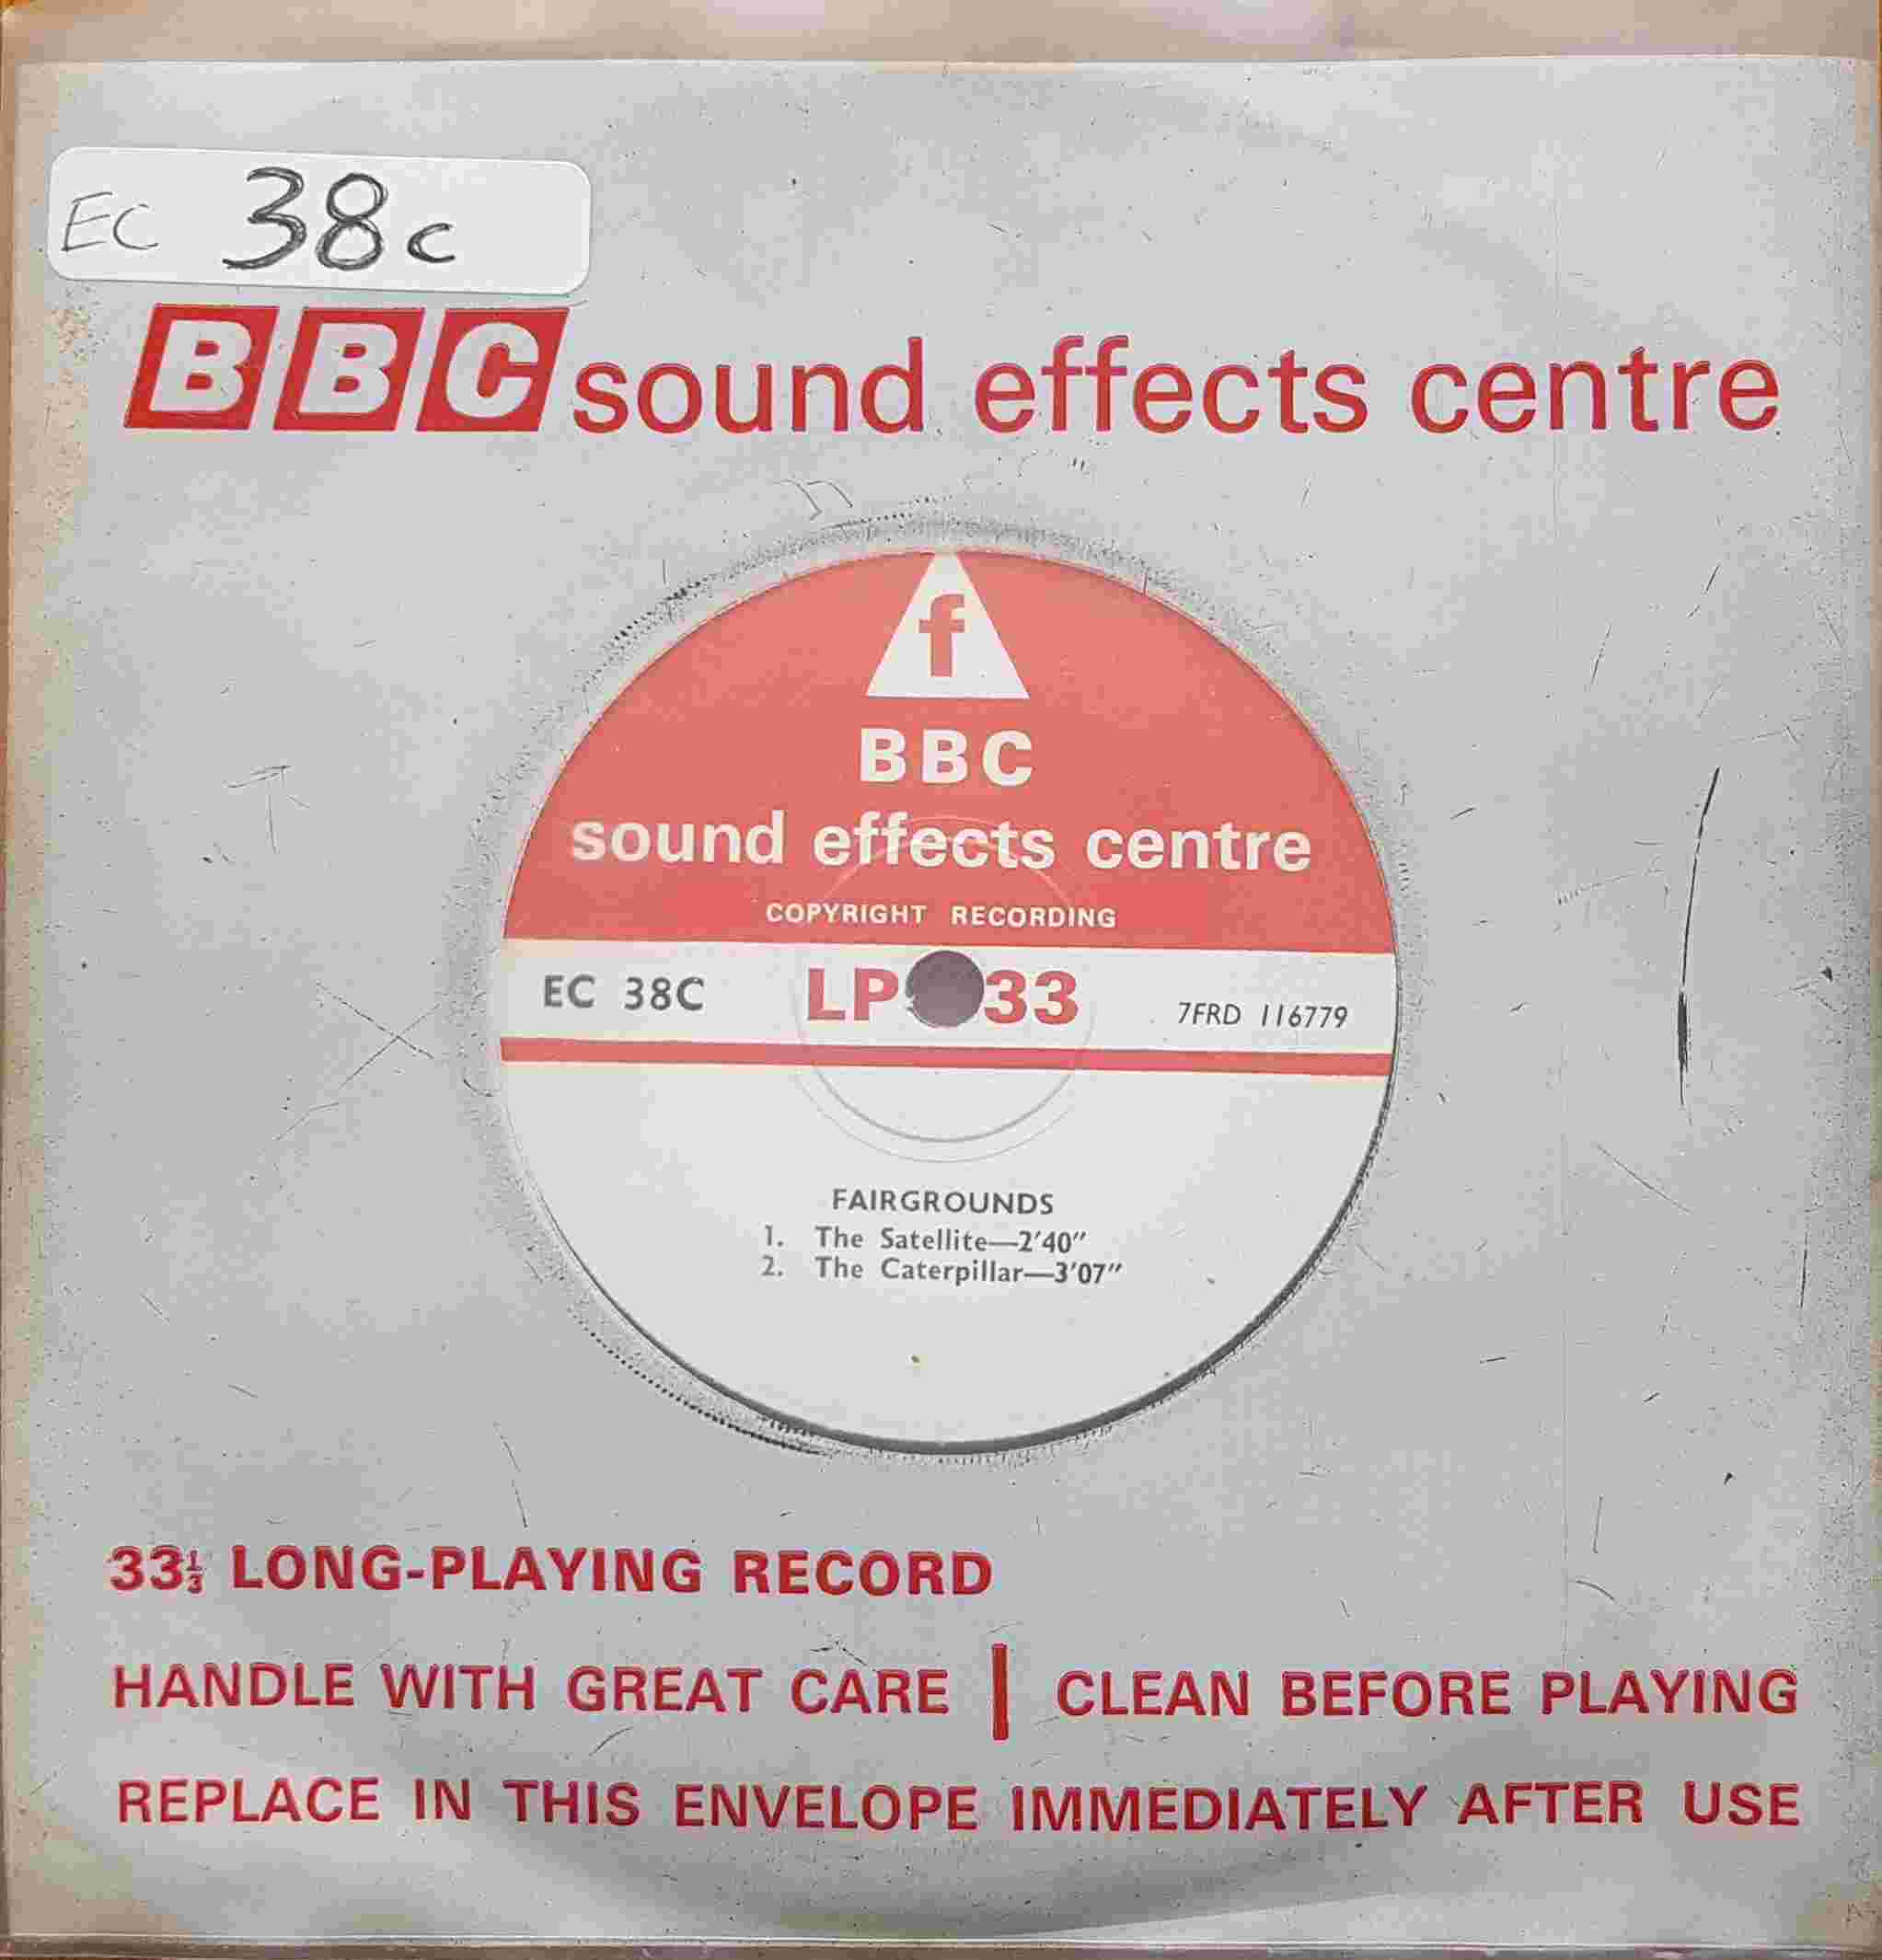 Picture of EC 38C Fairgounds by artist Not registered from the BBC records and Tapes library